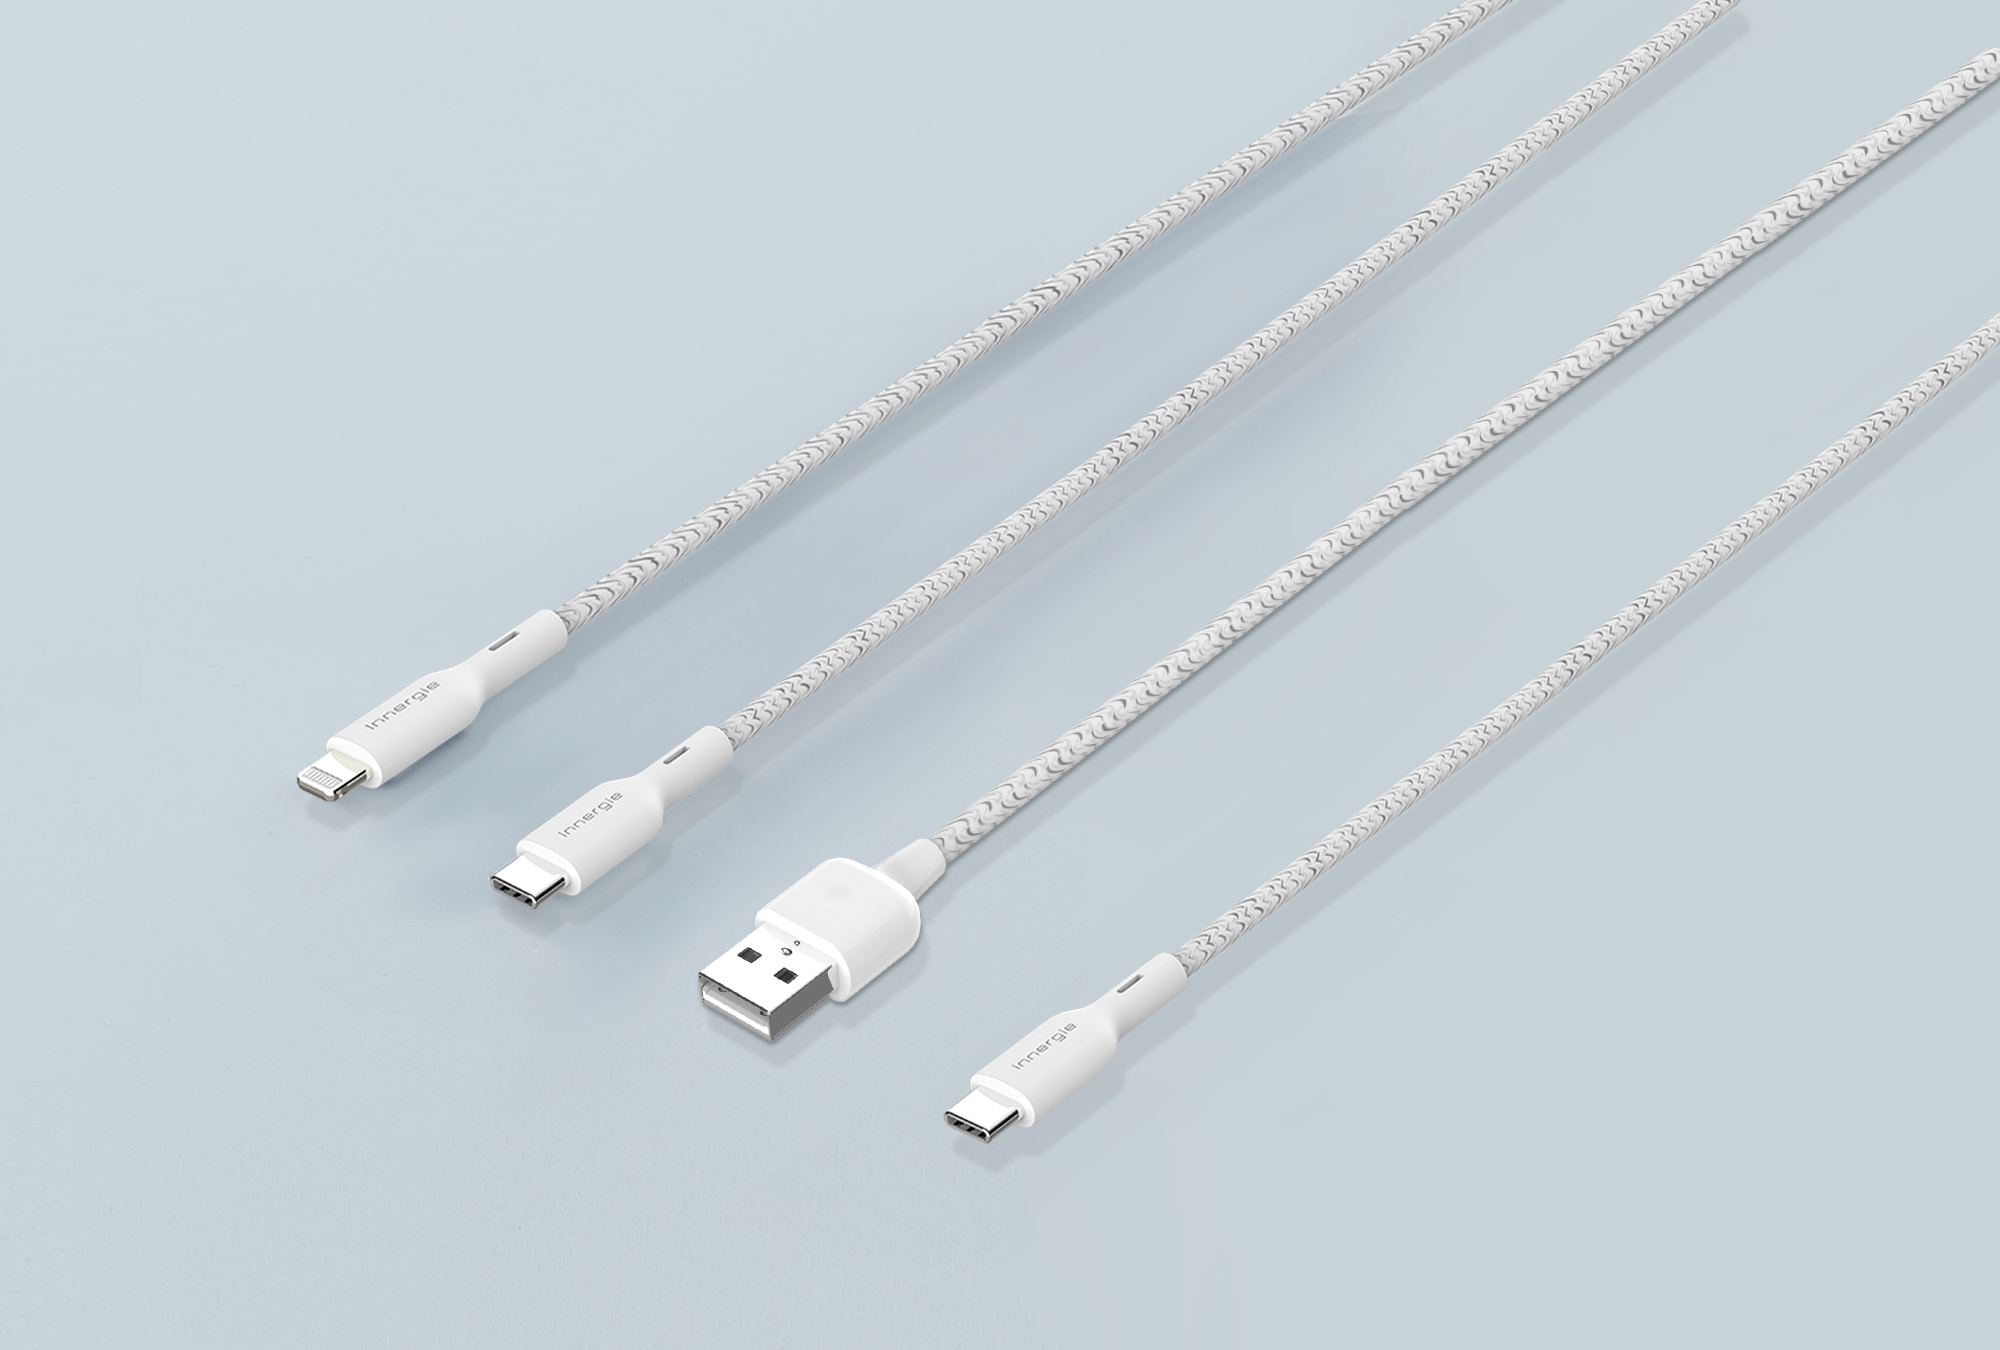 Mini USB vs. Micro USB: What�s the Difference?